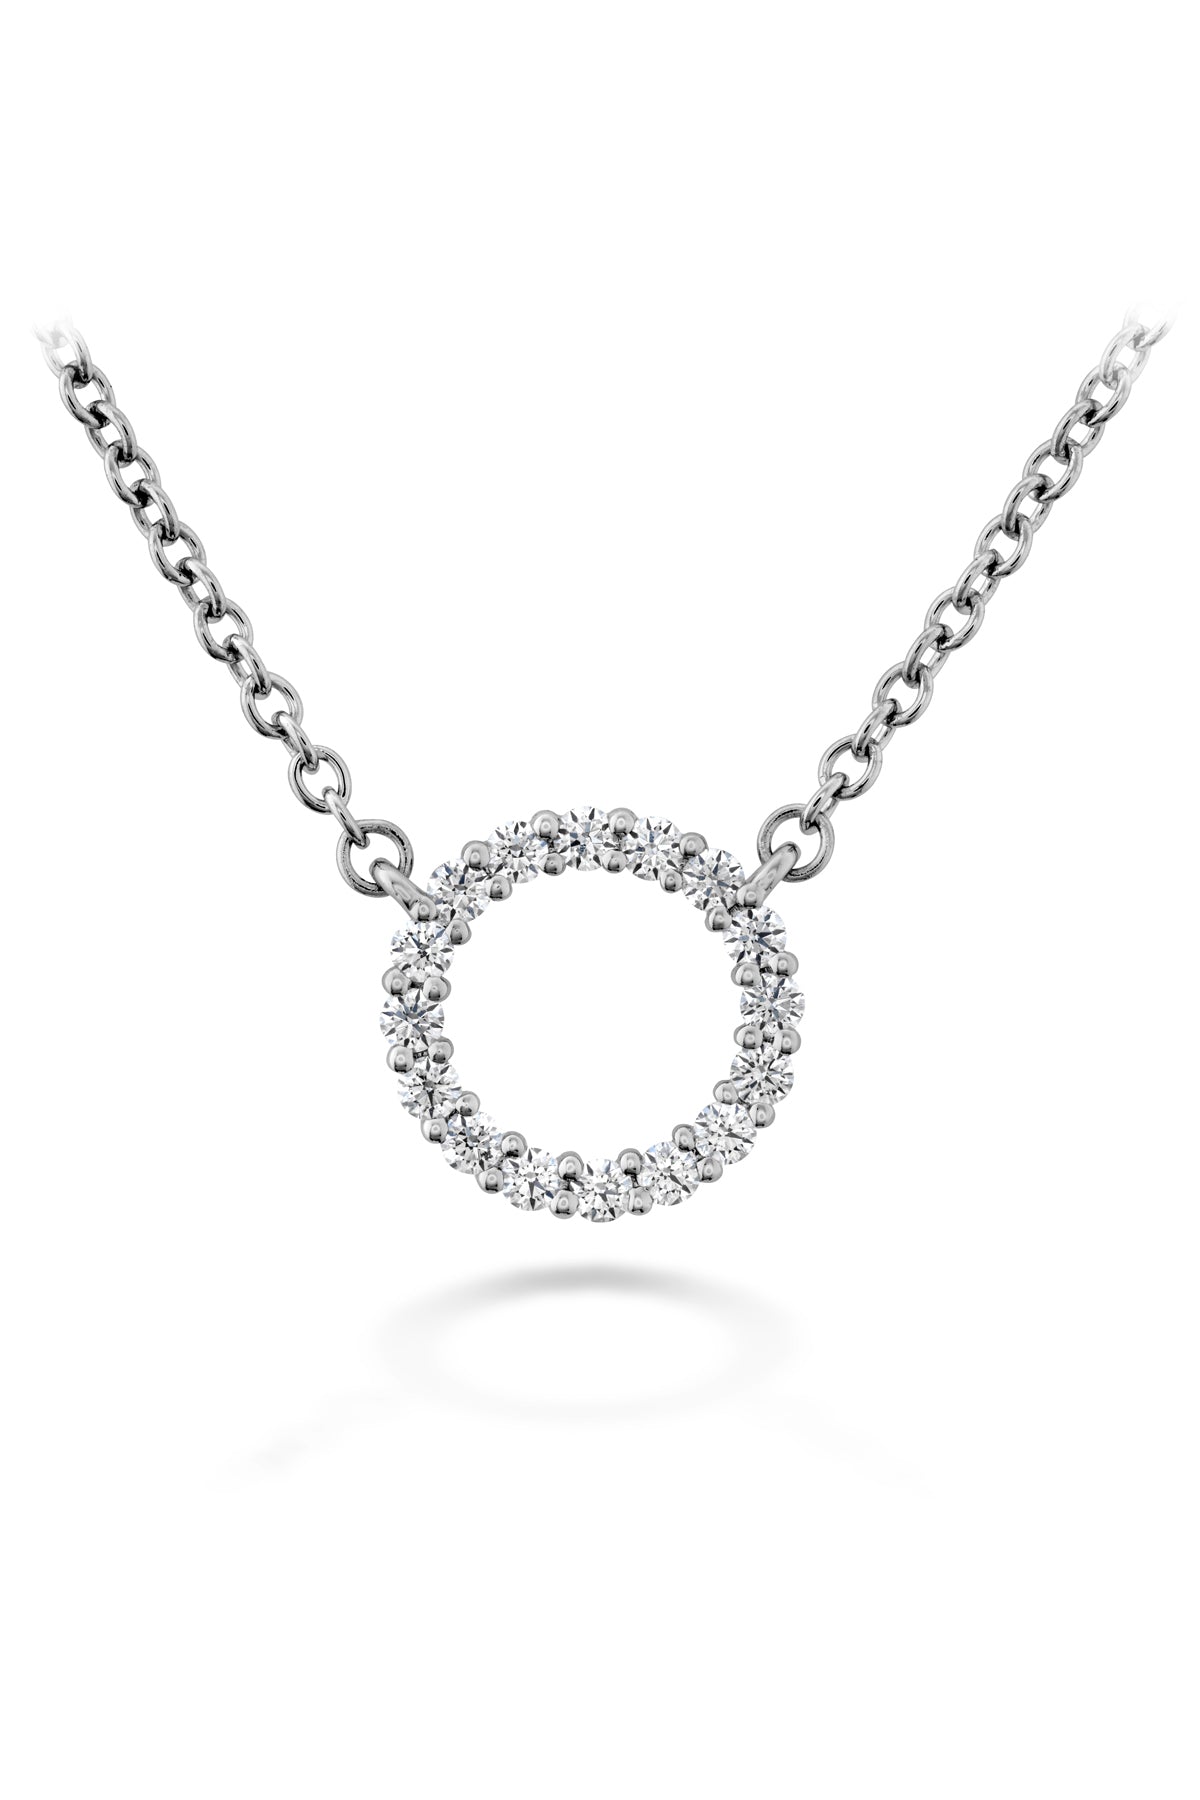 Small Signature Circle Pendant From Hearts On Fire available at LeGassick Diamonds and Jewellery Gold Coast, Australia.